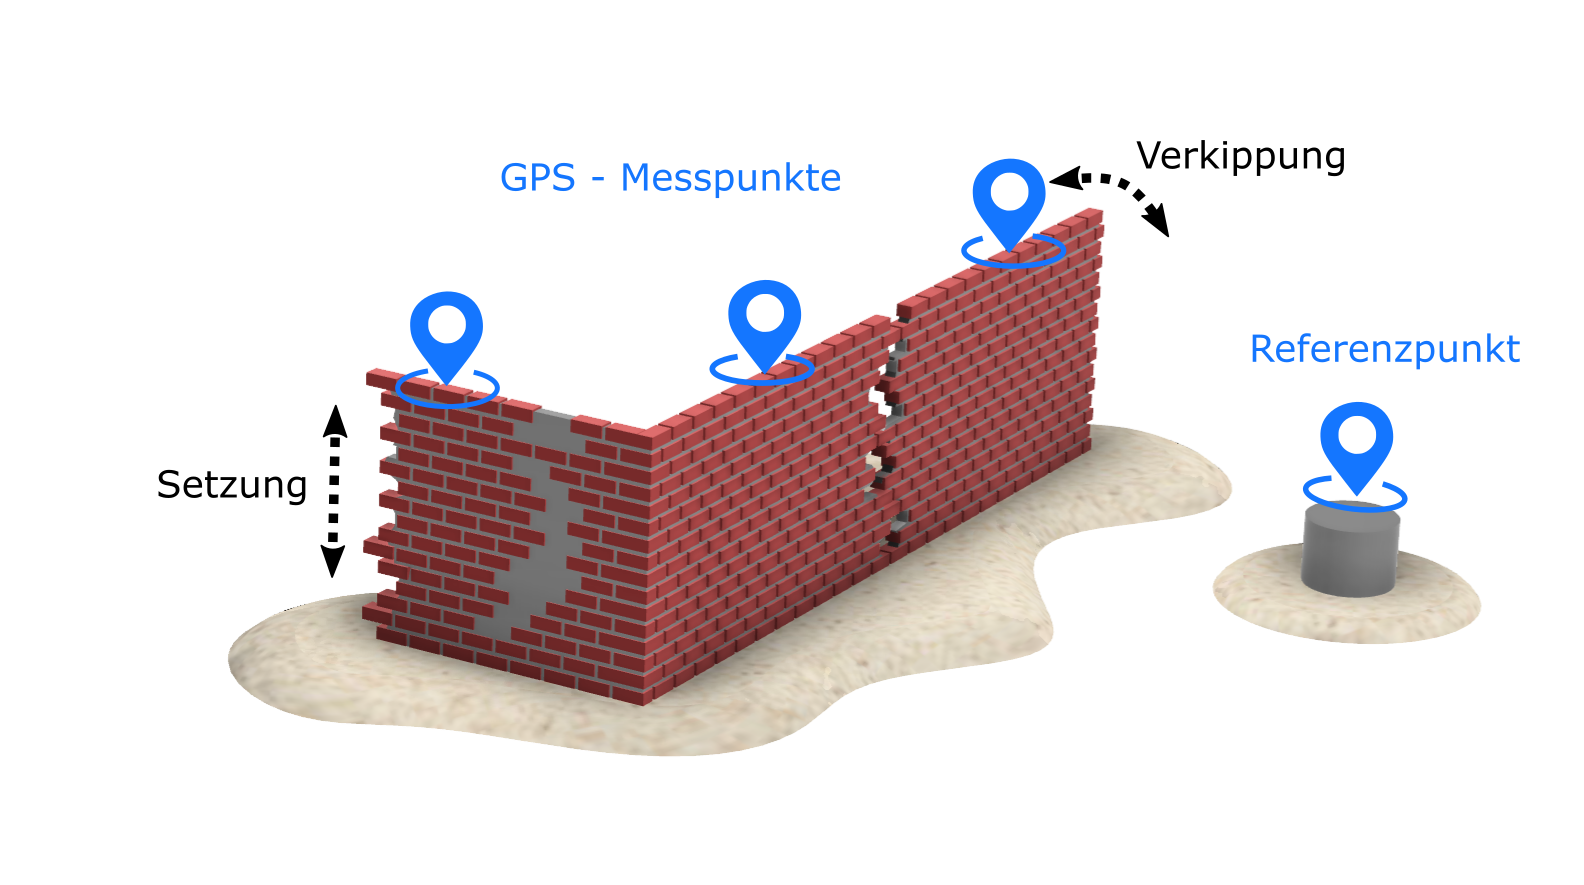 With the SuessCo GPS sensor system, absolute position changes can be recorded digitally with an accuracy of 2 millimetres.